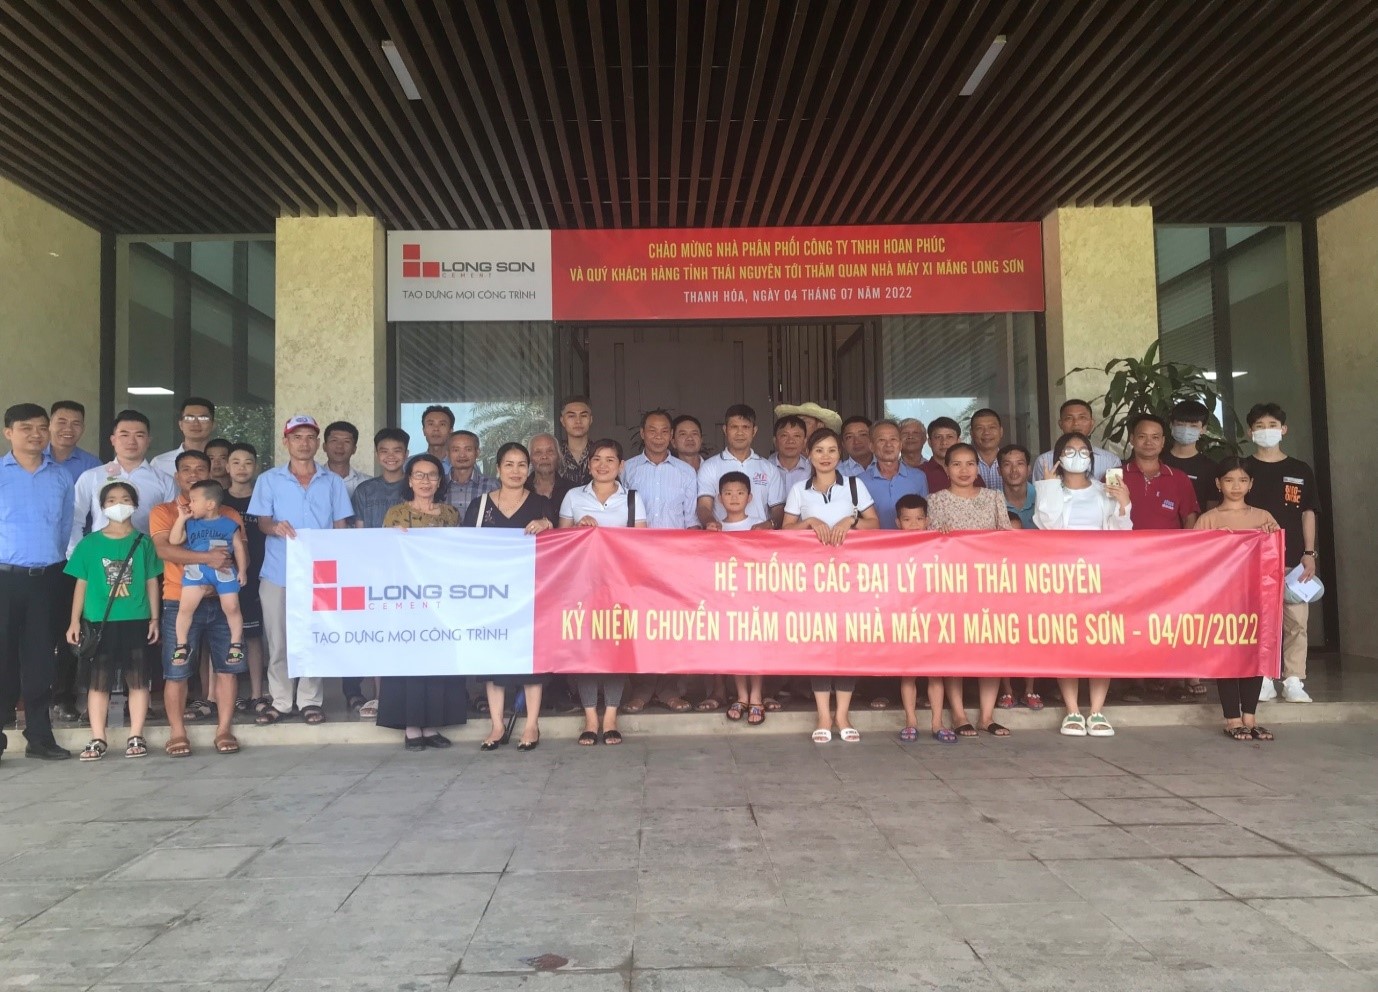 Welcome Distributor Hoan Phuc Co., Ltd and customers in Thai Nguyen province to visit Long Son Cement Plant.